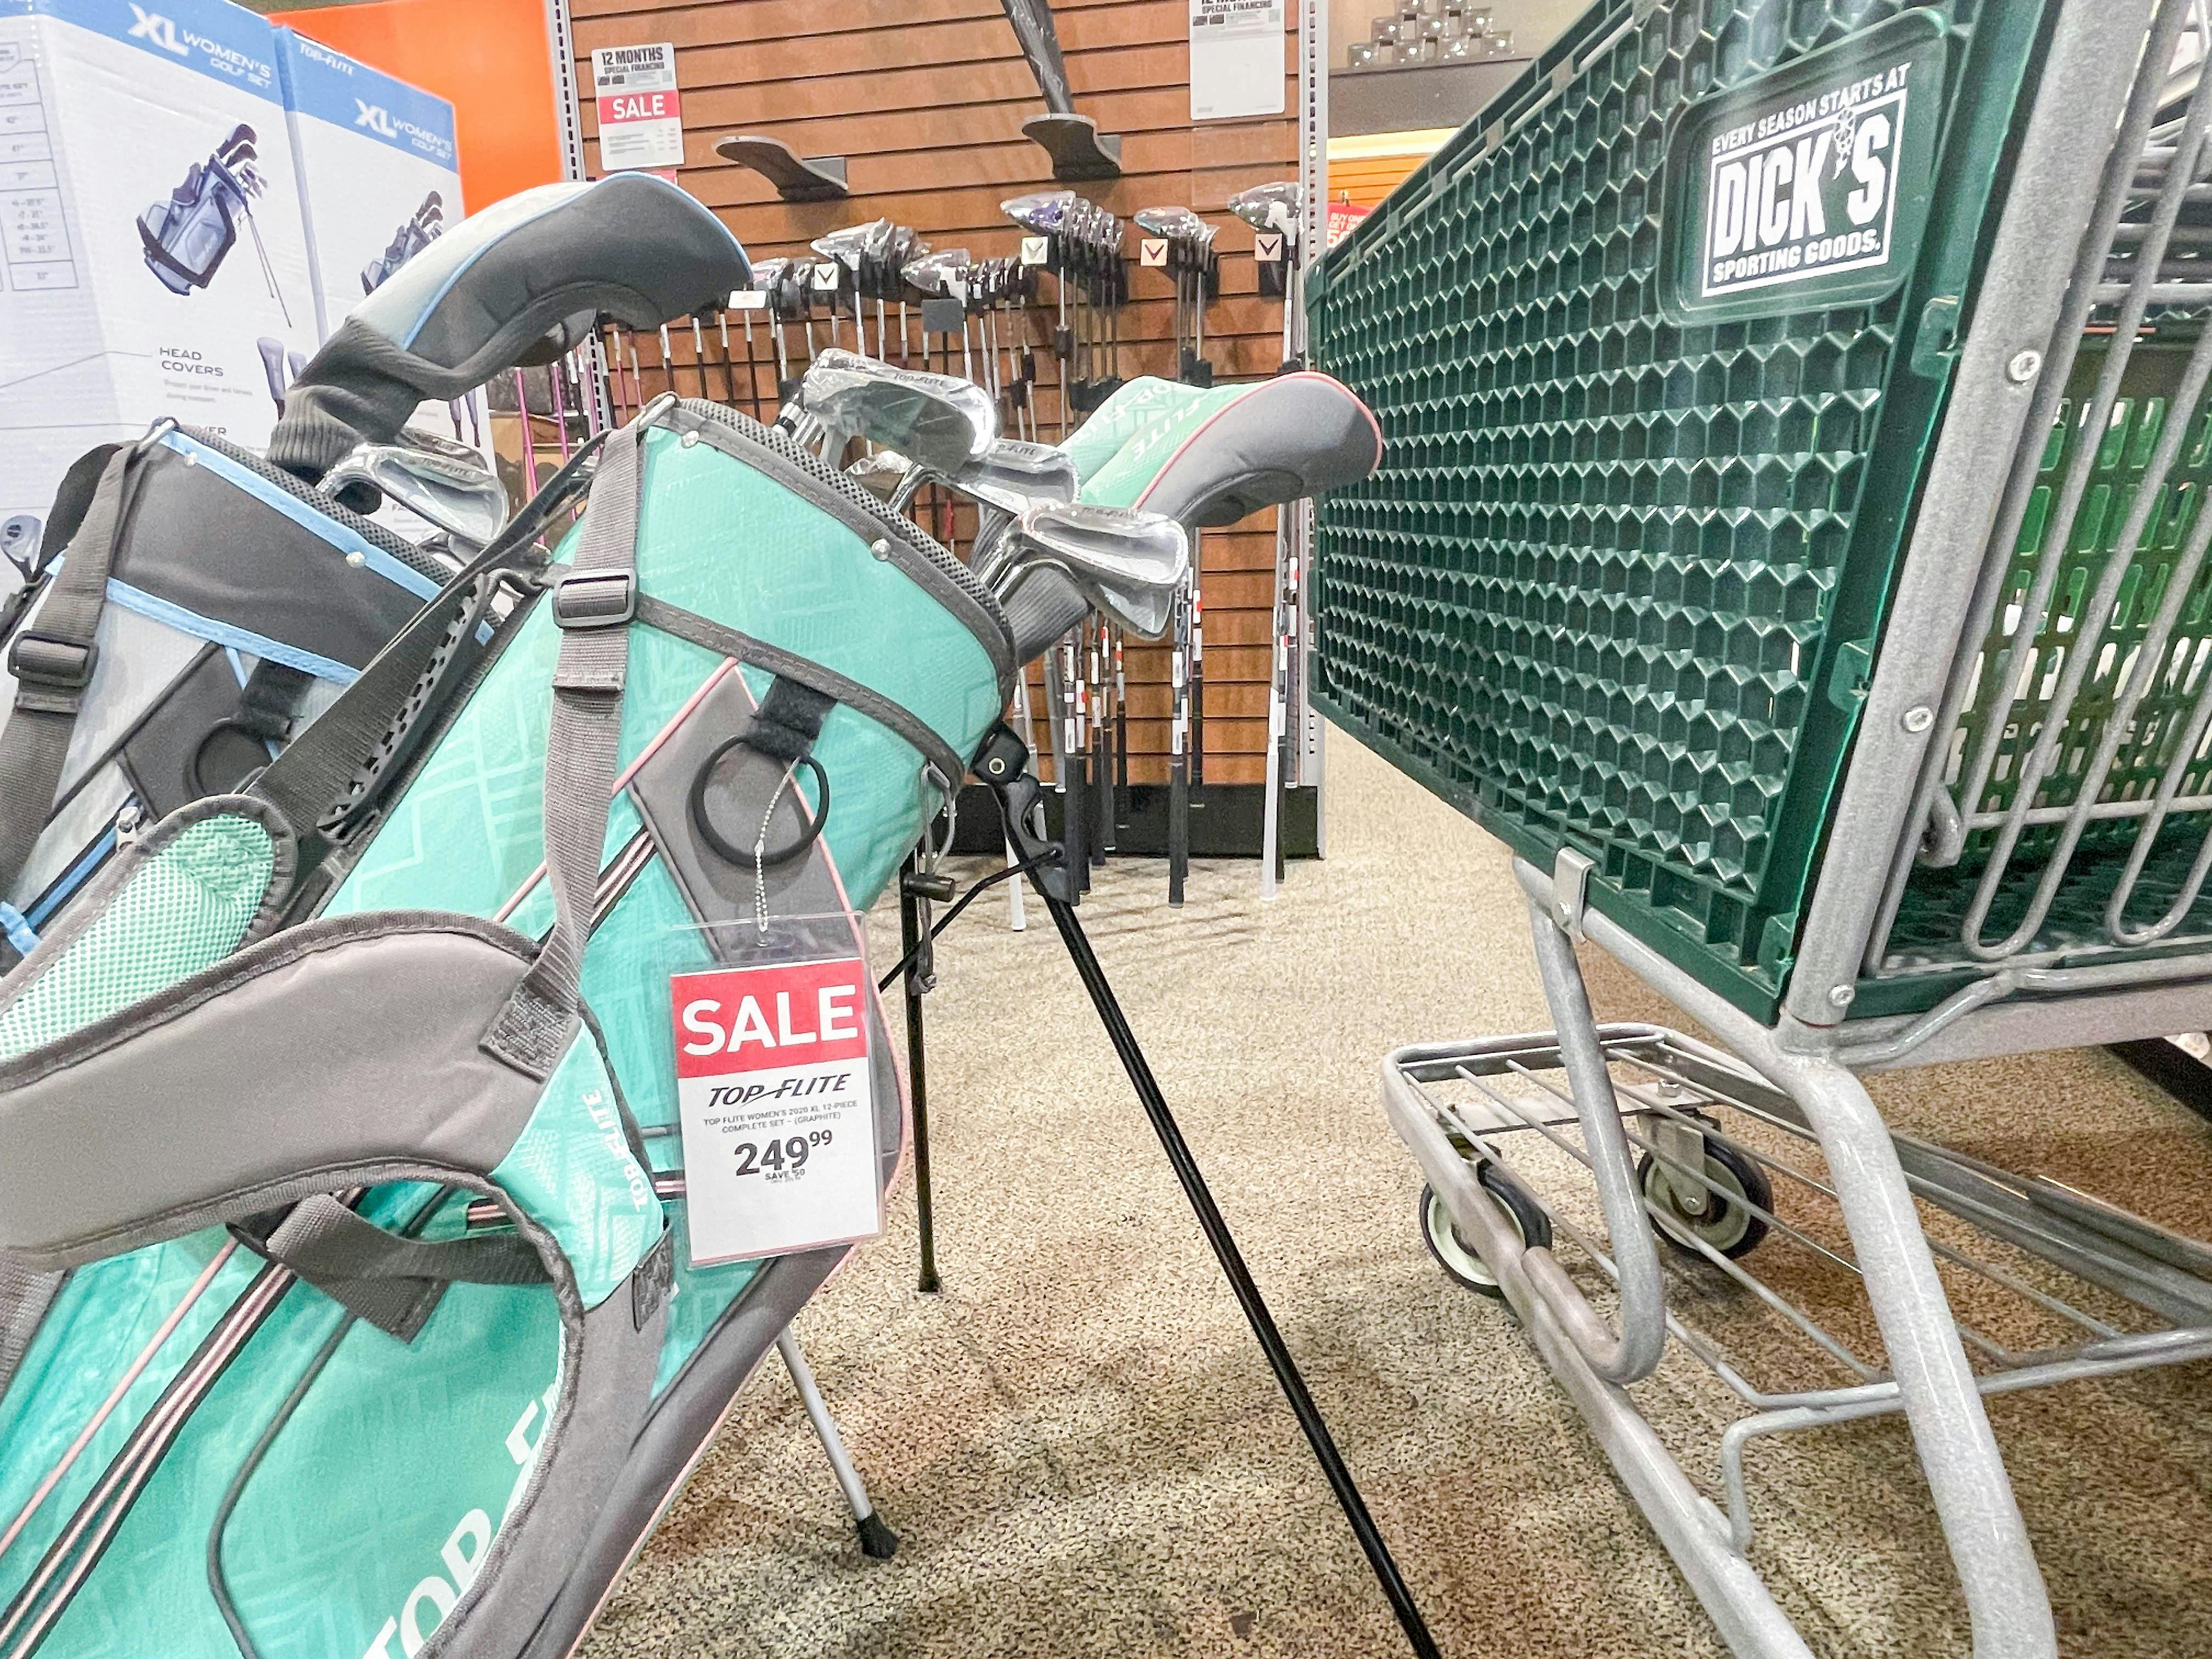 A Dick's Sporting Goods shopping cart parked in front of some Top-Flite golf club sets.